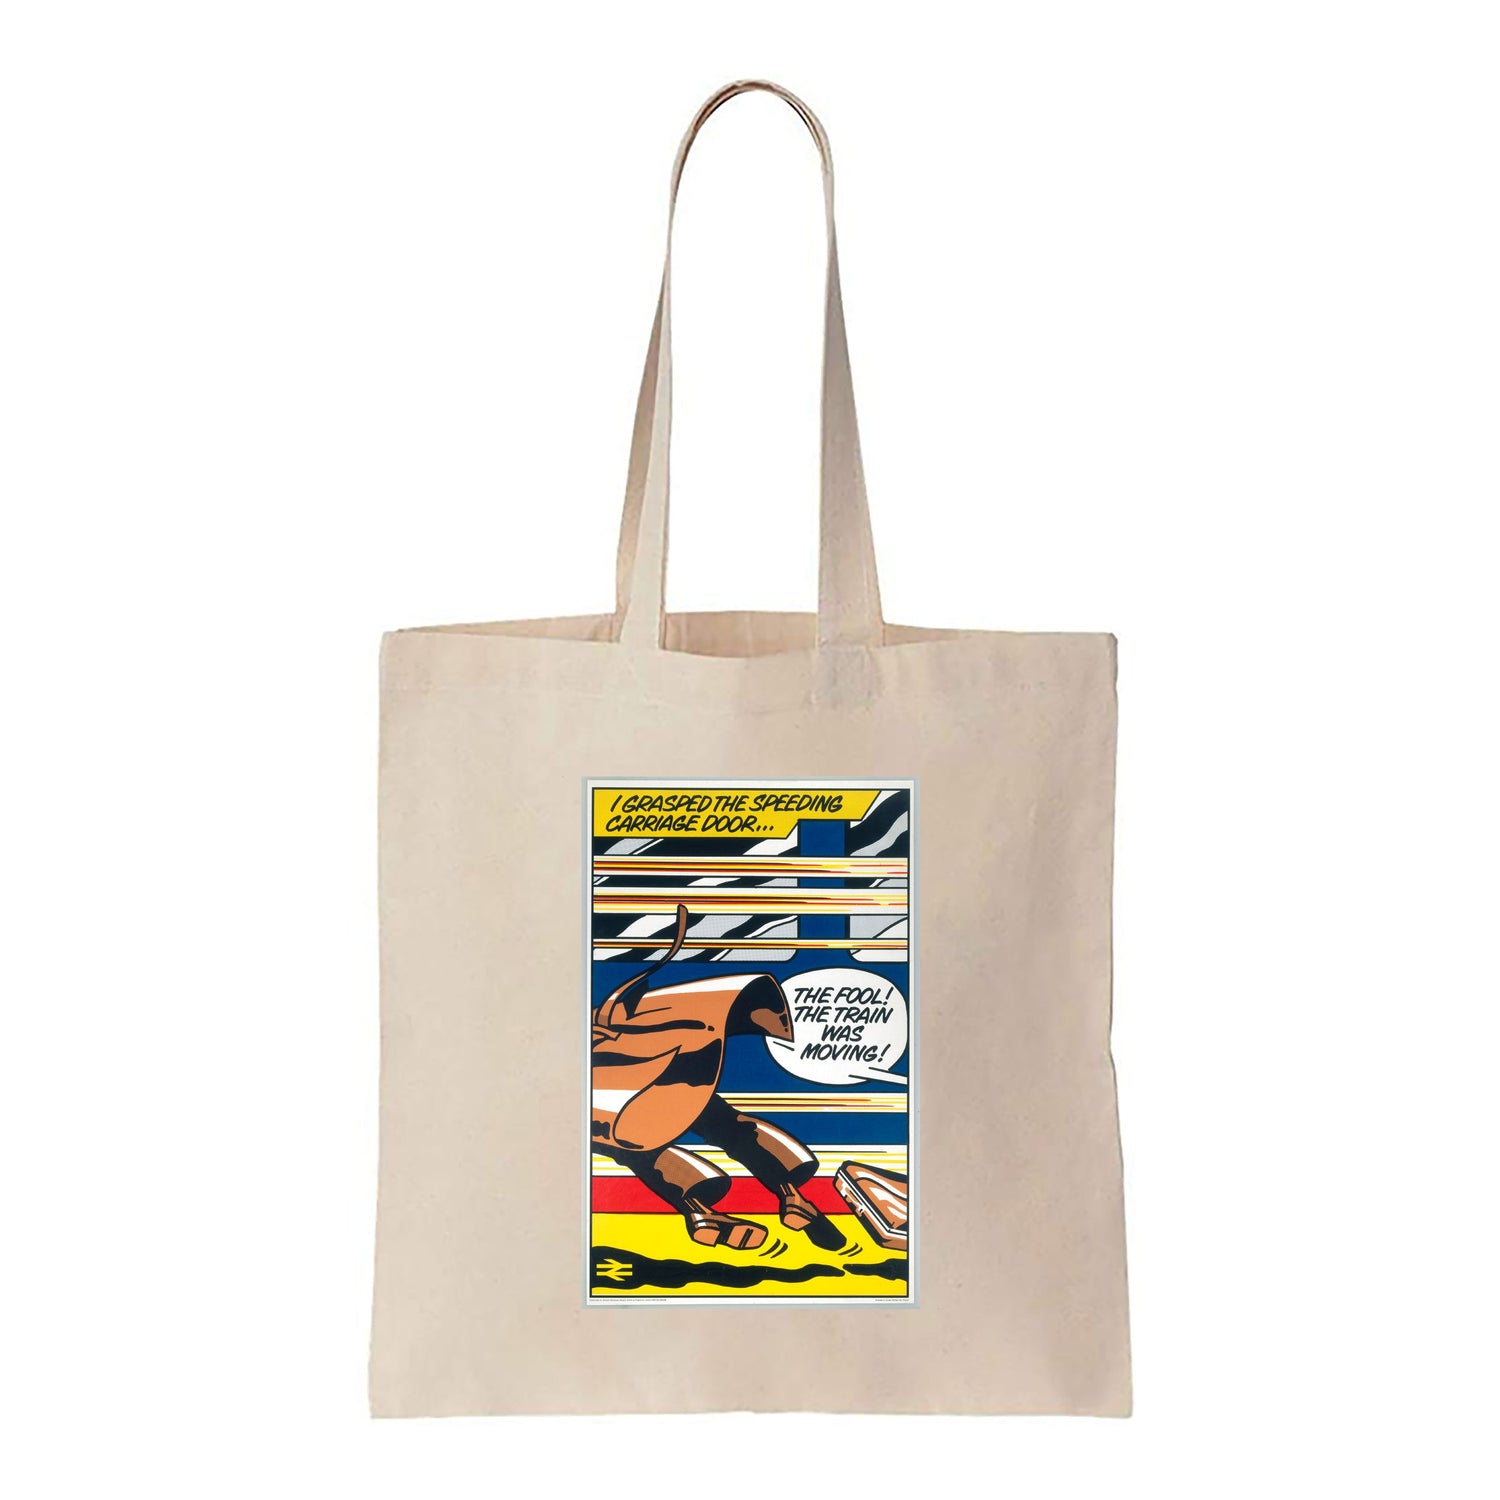 I grasped the Speeding Carriage Door - Canvas Tote Bag